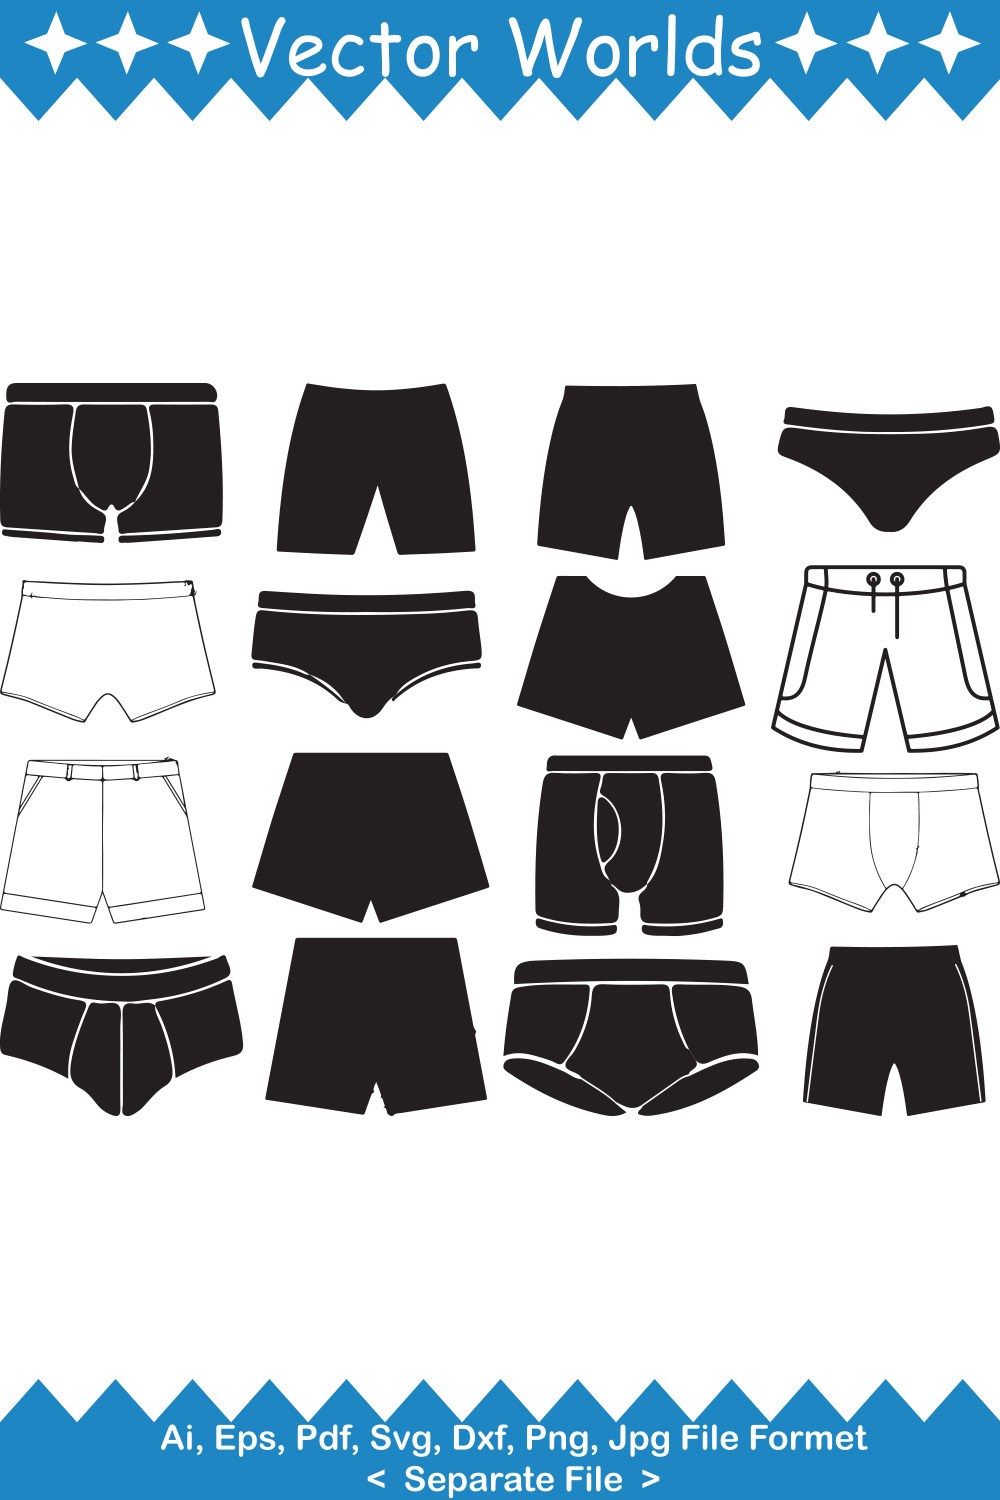 Bundle of vector gorgeous images of short pant silhouettes.